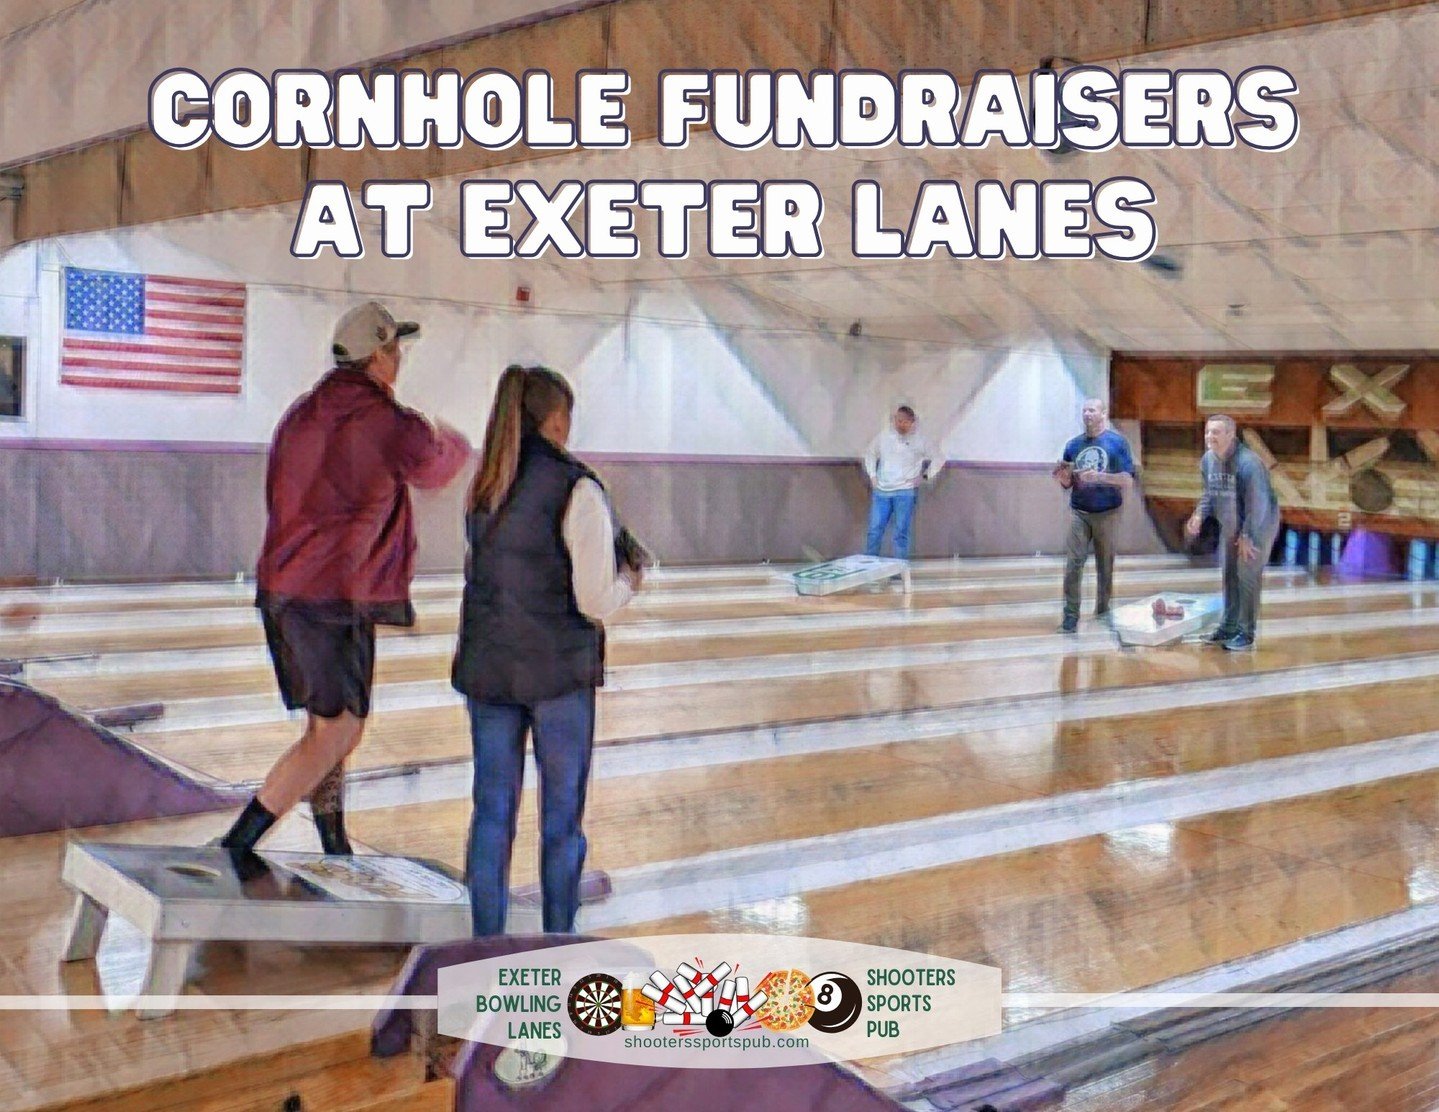 Bringing the community together, one toss at a time 🌽🕳 ⁠
⁠
Join us for cornhole fundraisers at Exeter Lanes and toss for a cause! ⁠
⁠
#CornholeForACause #ExeterLanes⁠